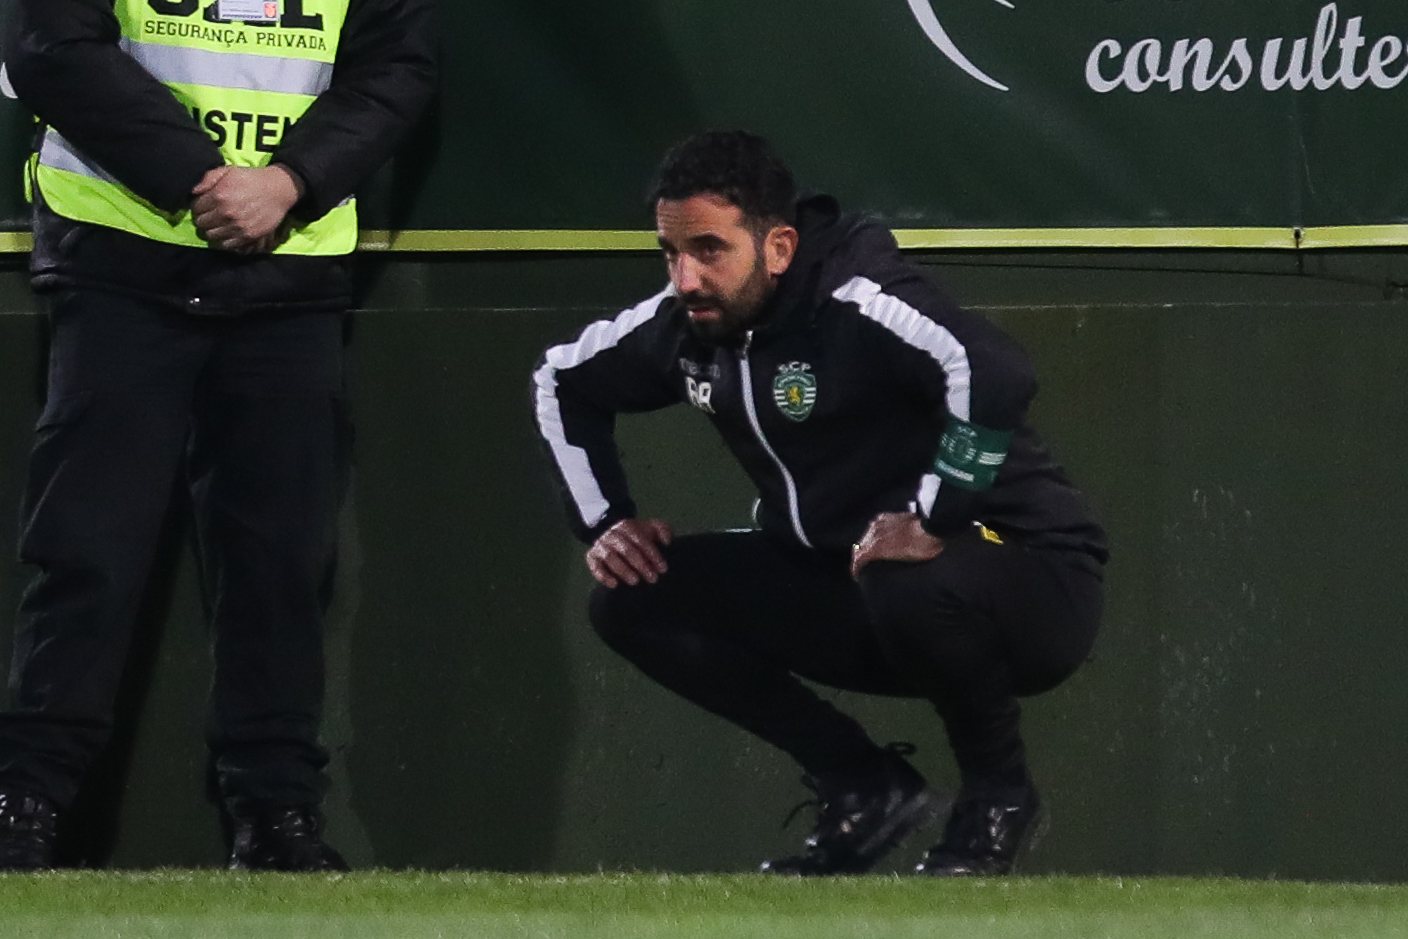 Sporting&#039;s head coach Ruben Amorim reacts during the Portuguese First League soccer match between Tondela and Sporting held at Joao Cardoso stadium in Tondela, Portugal, 13 March 2021. PAULO NOVAIS/LUSA